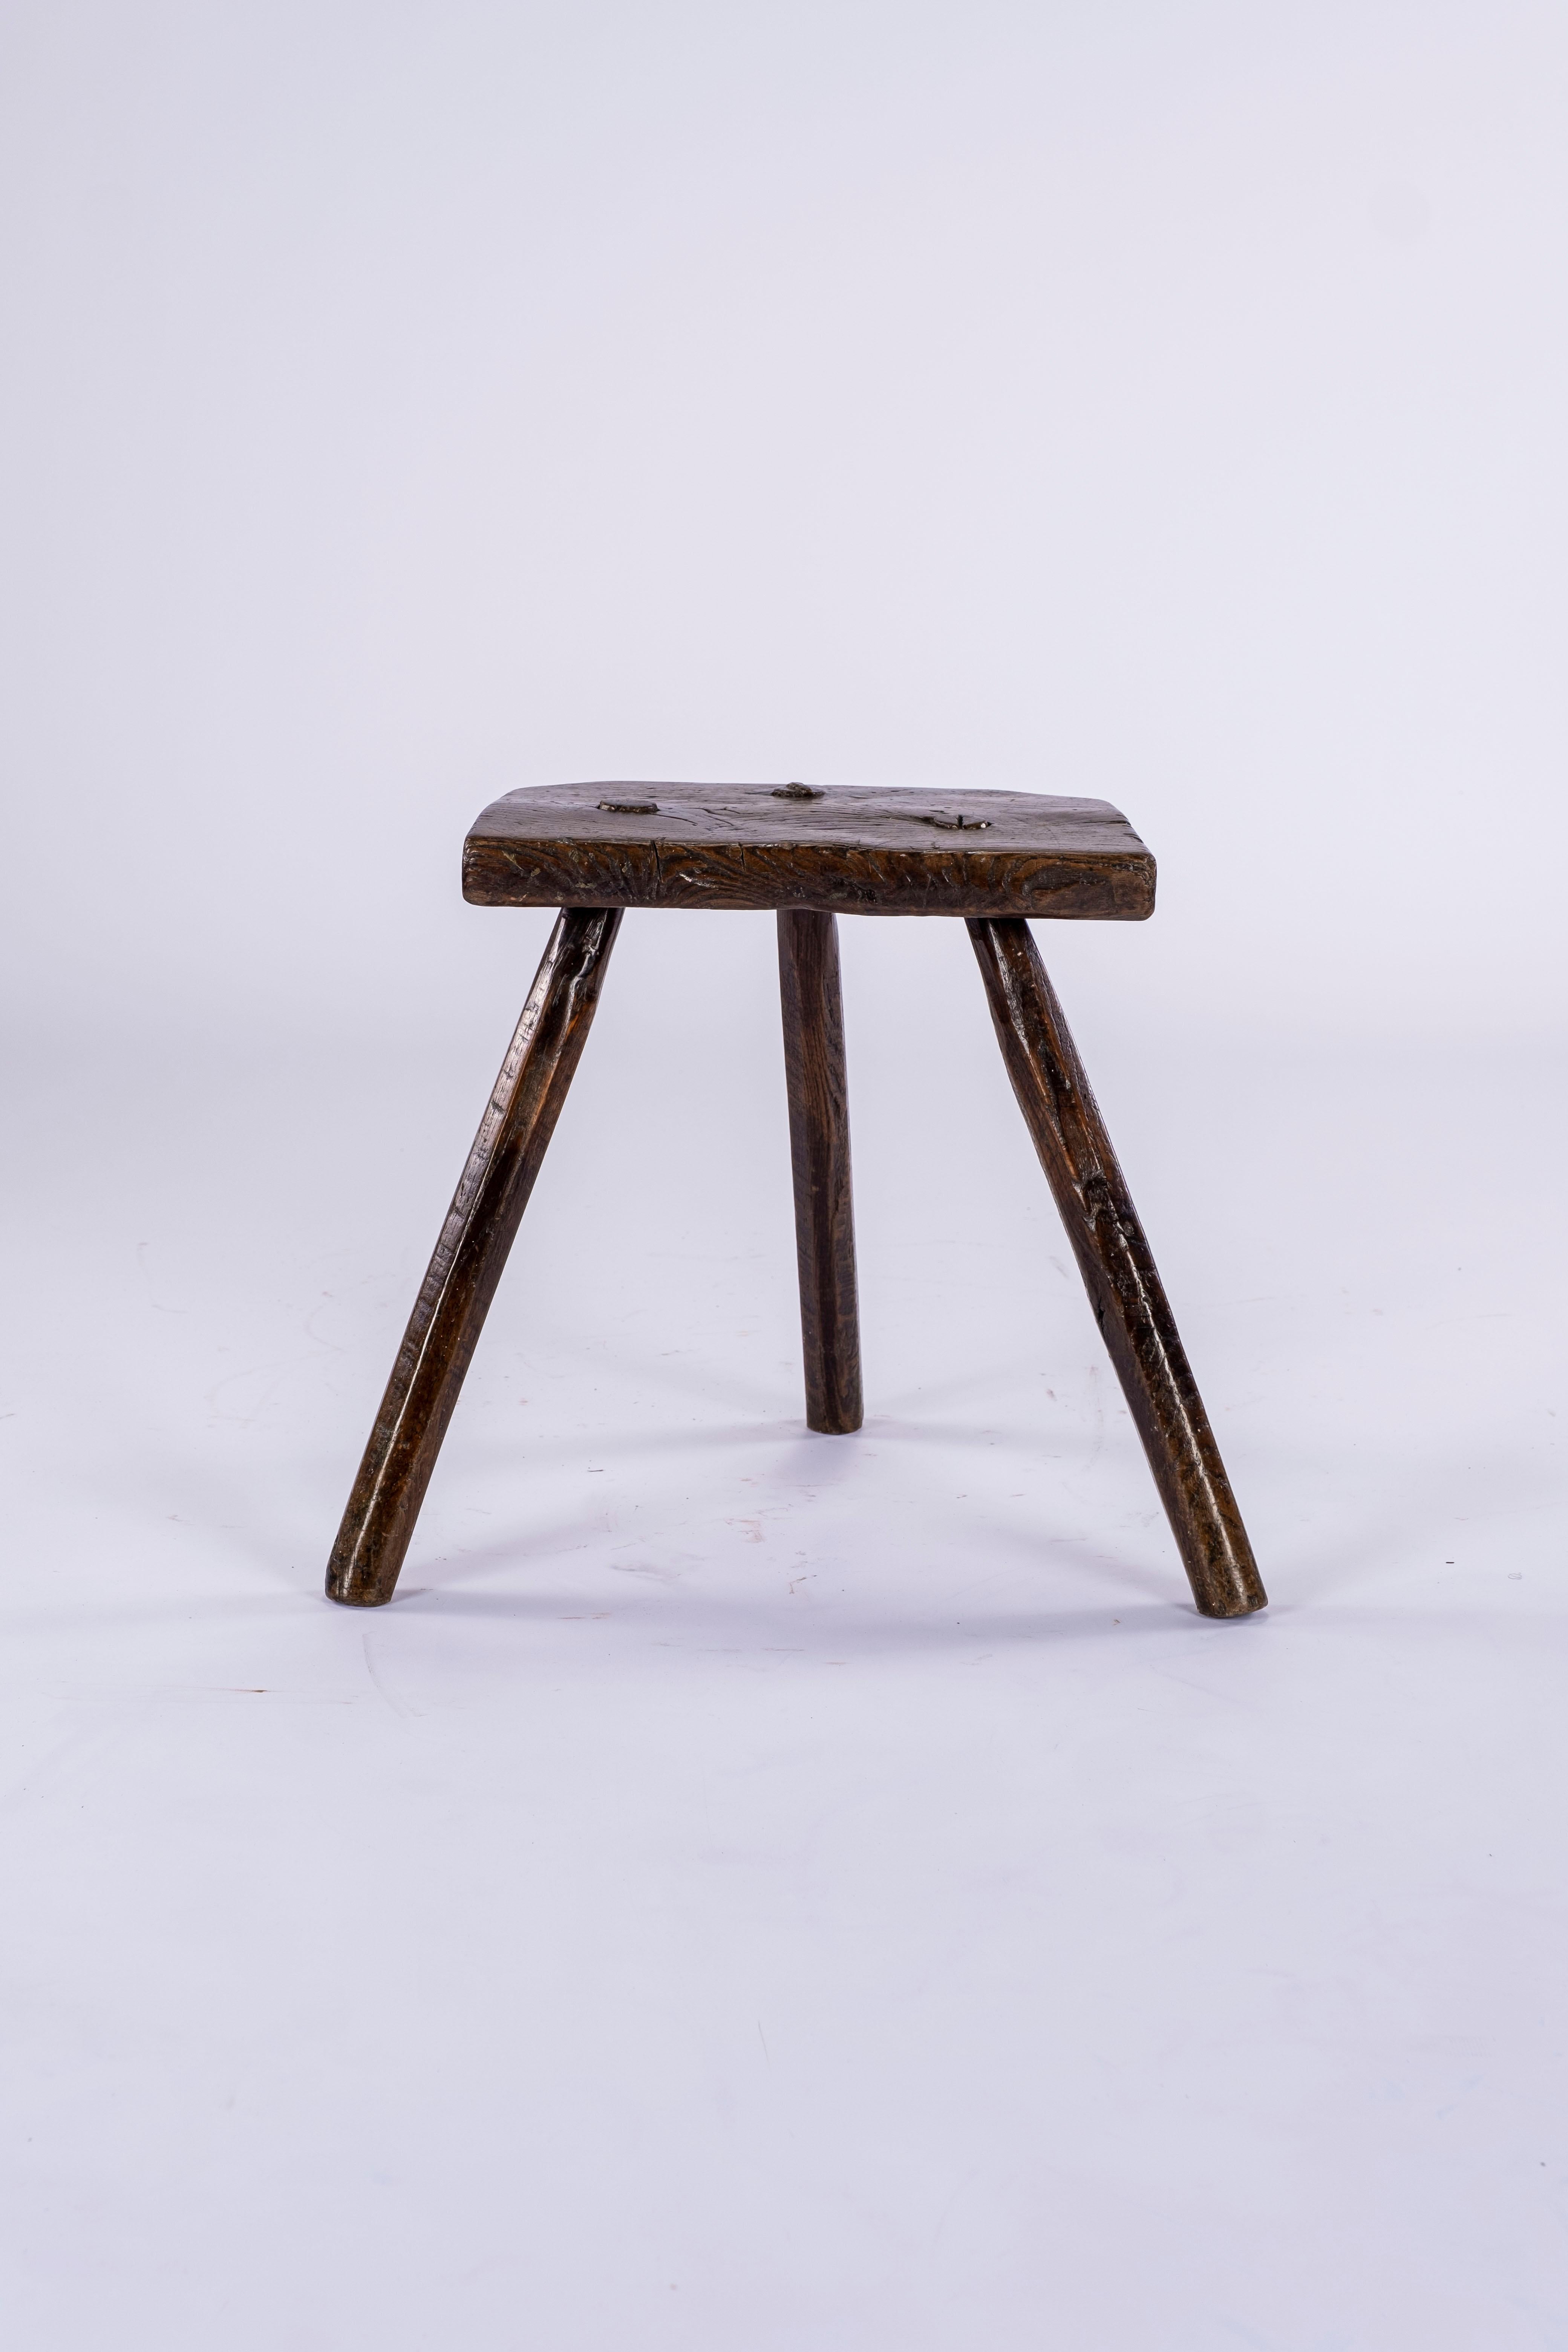 Early 19th century English Cutler's stool used by workmen in the Sheffield Cutlery Company. Legs have ribbed detail. Beautiful patina. Would make a wonderful side table. Legs extend beyond seat: Legs width: 21.75